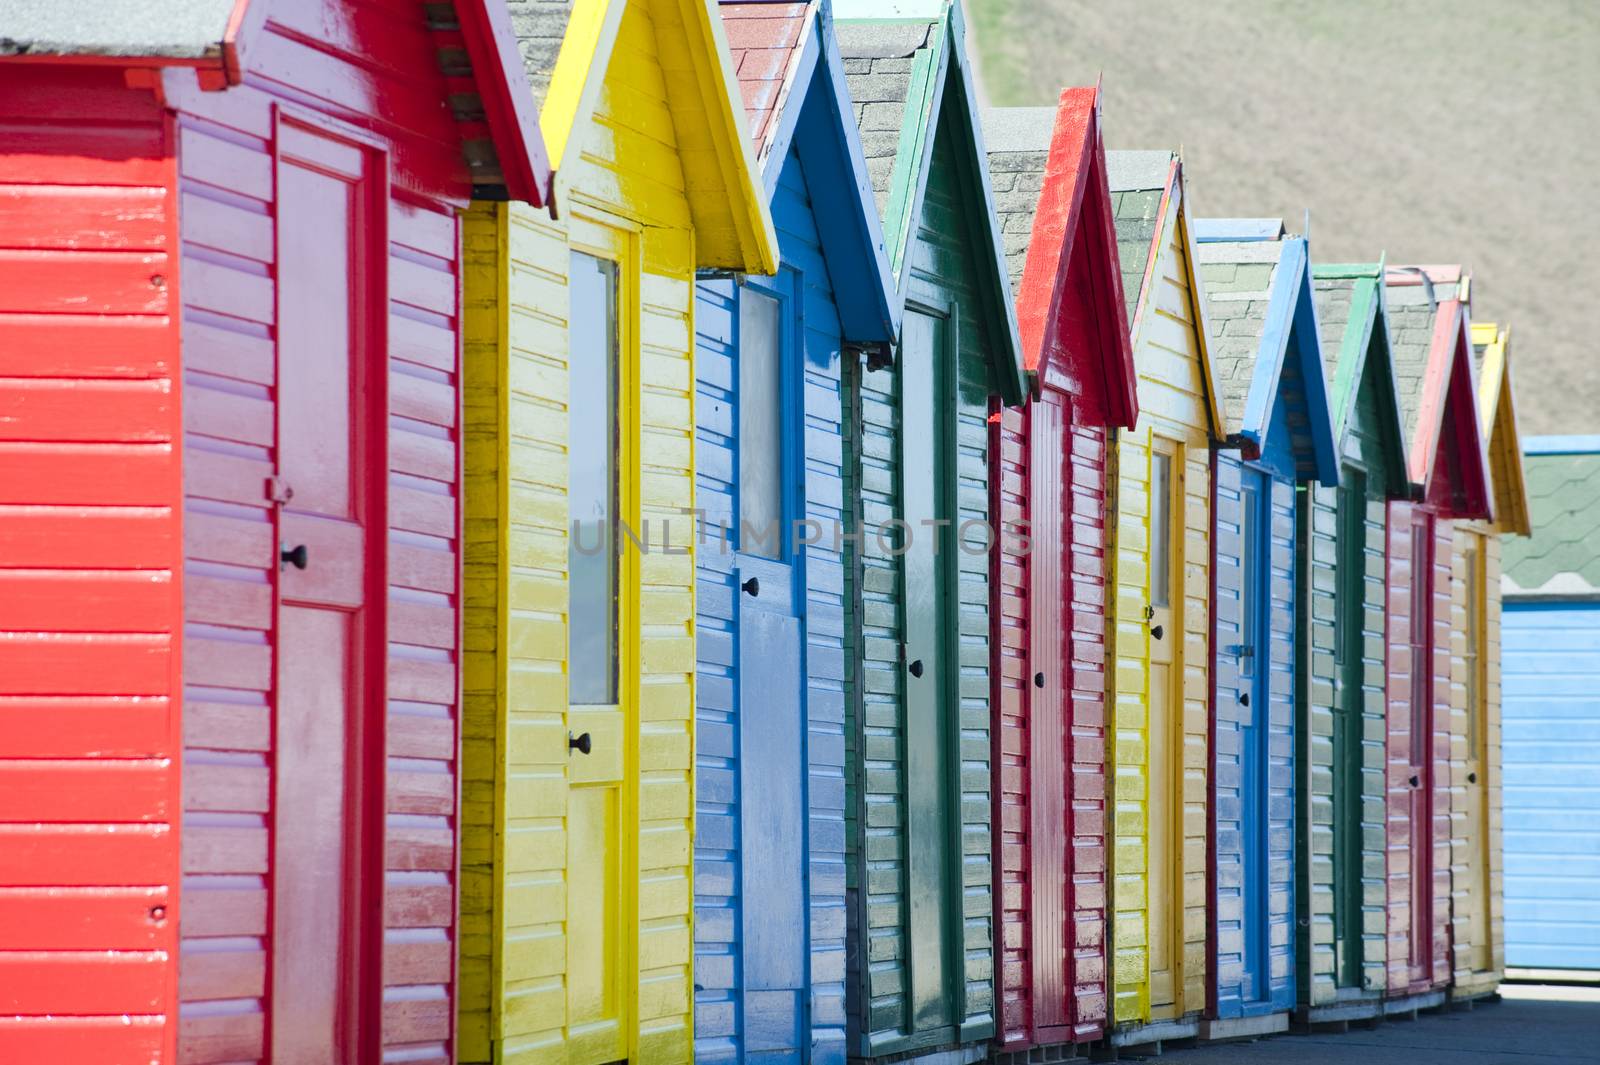 Row of colorful wooden beach huts by stockarch